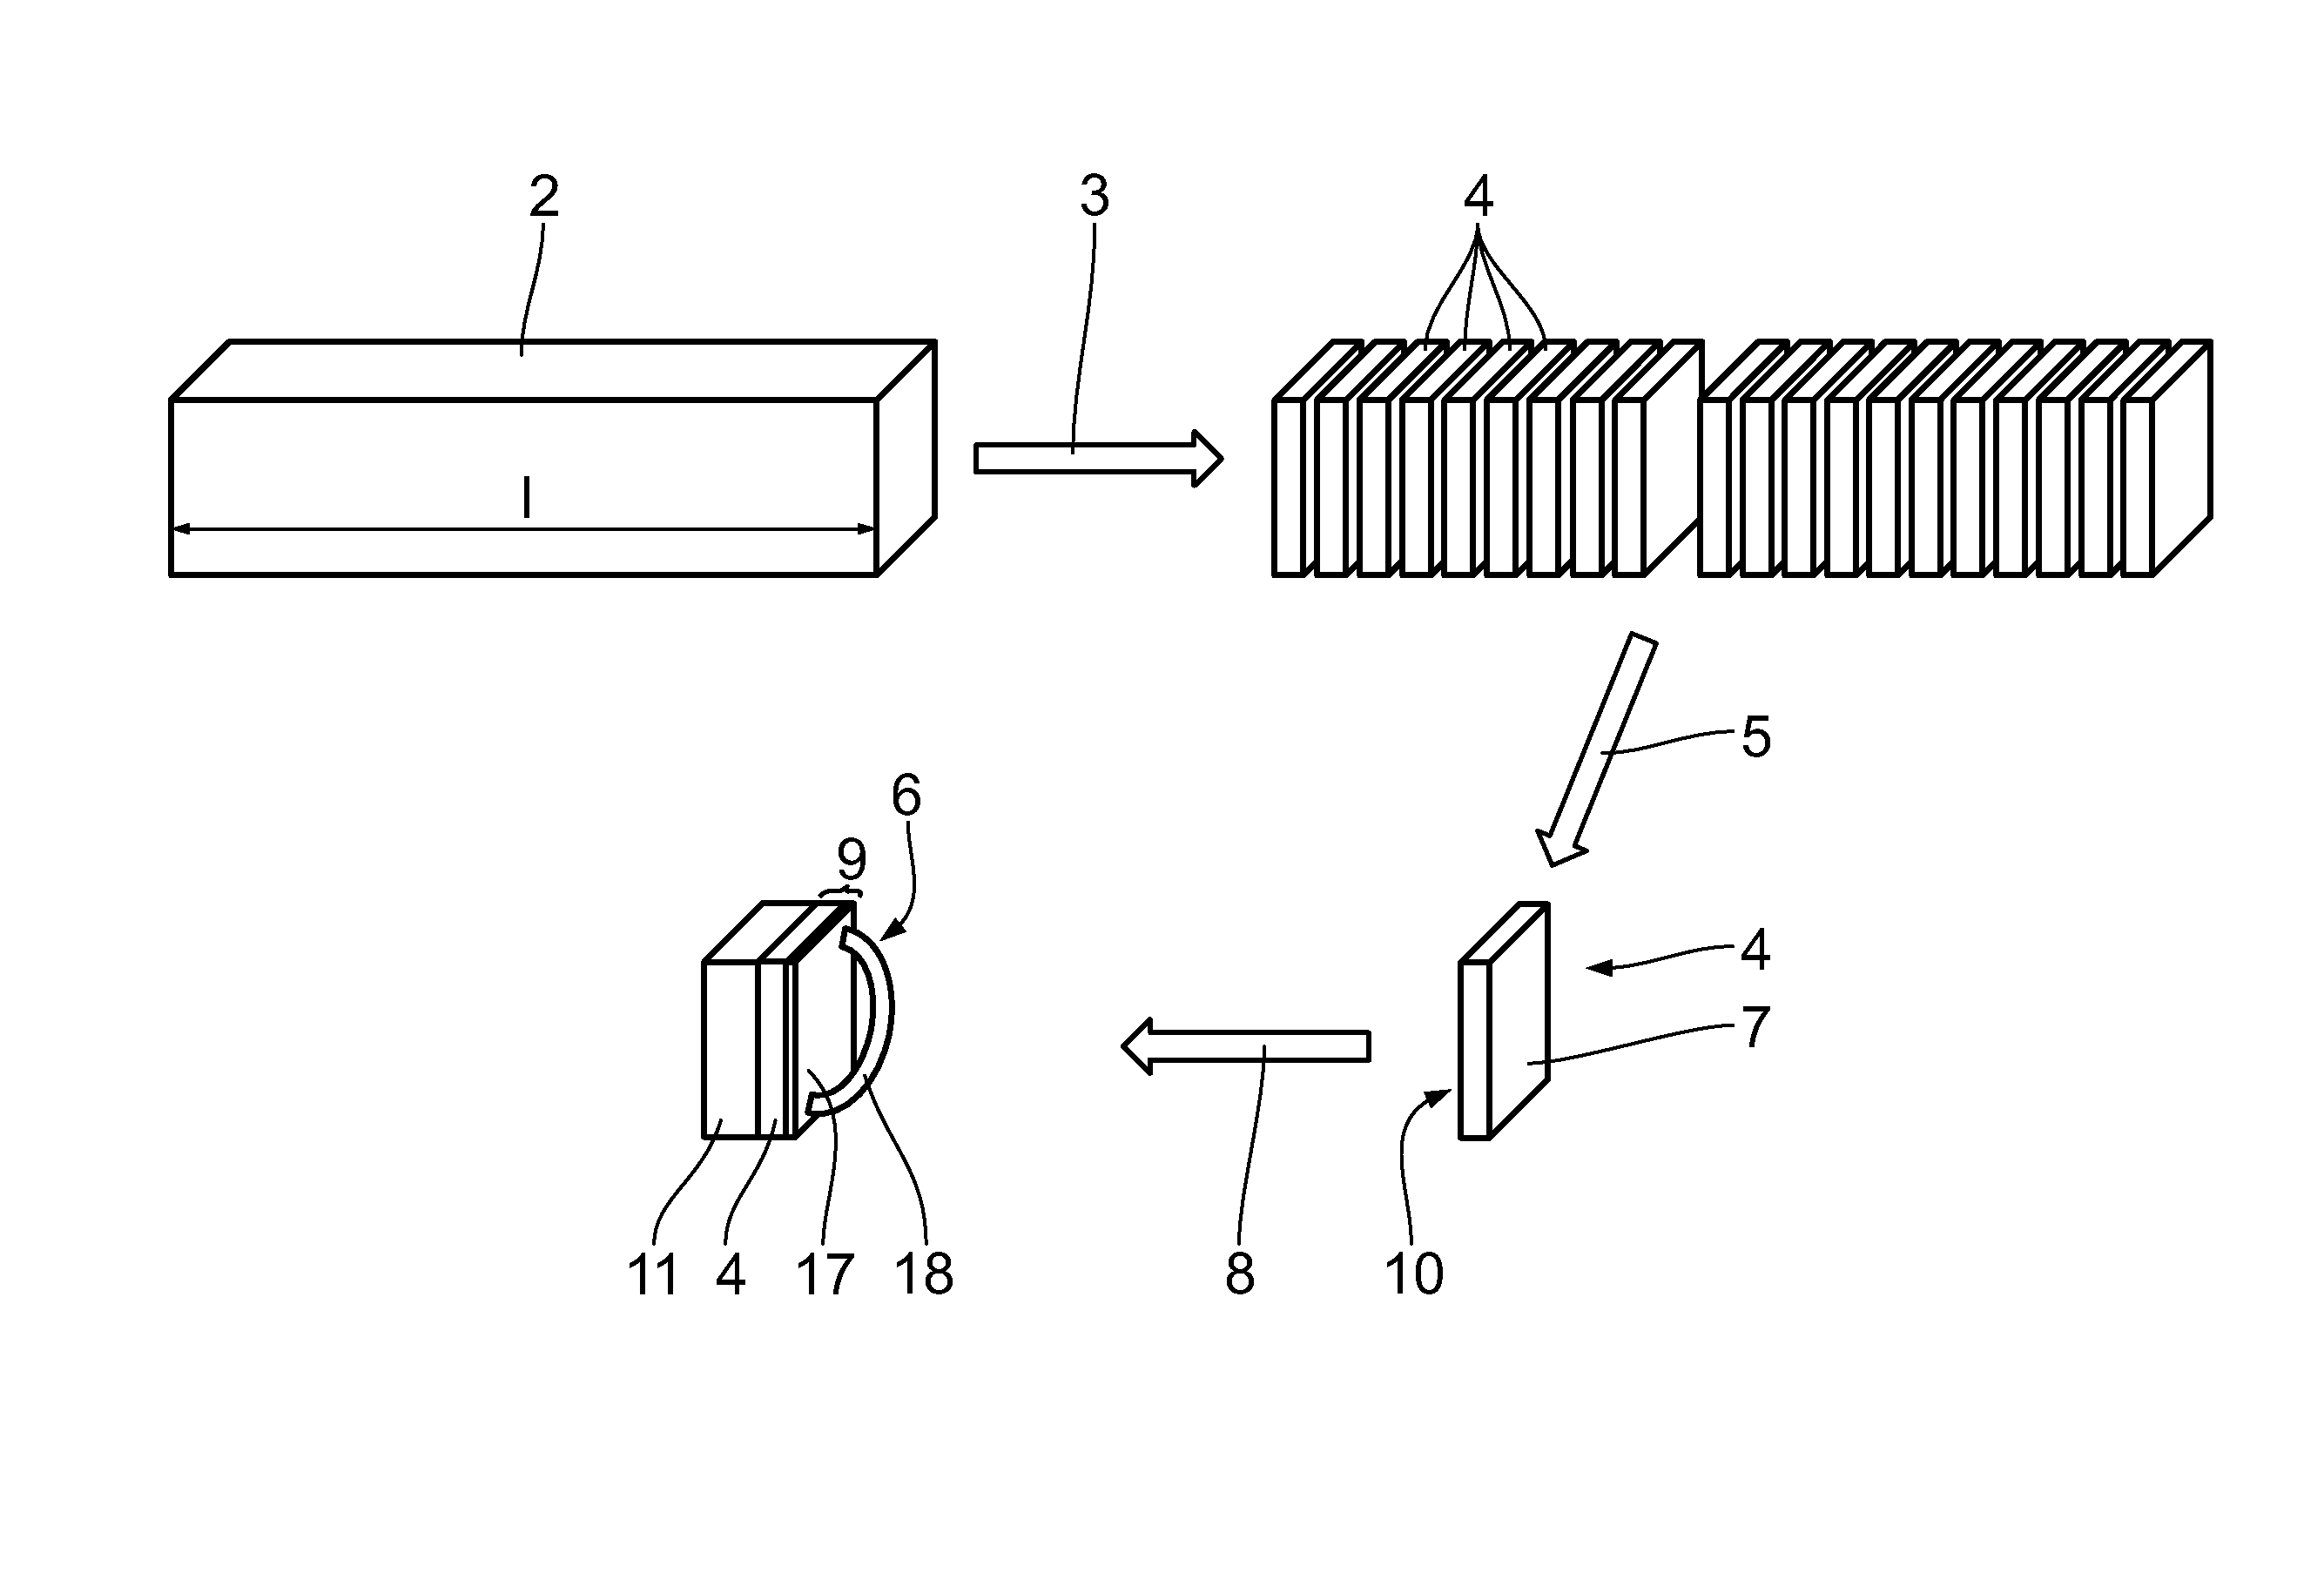 Method and device for cleaving wafers